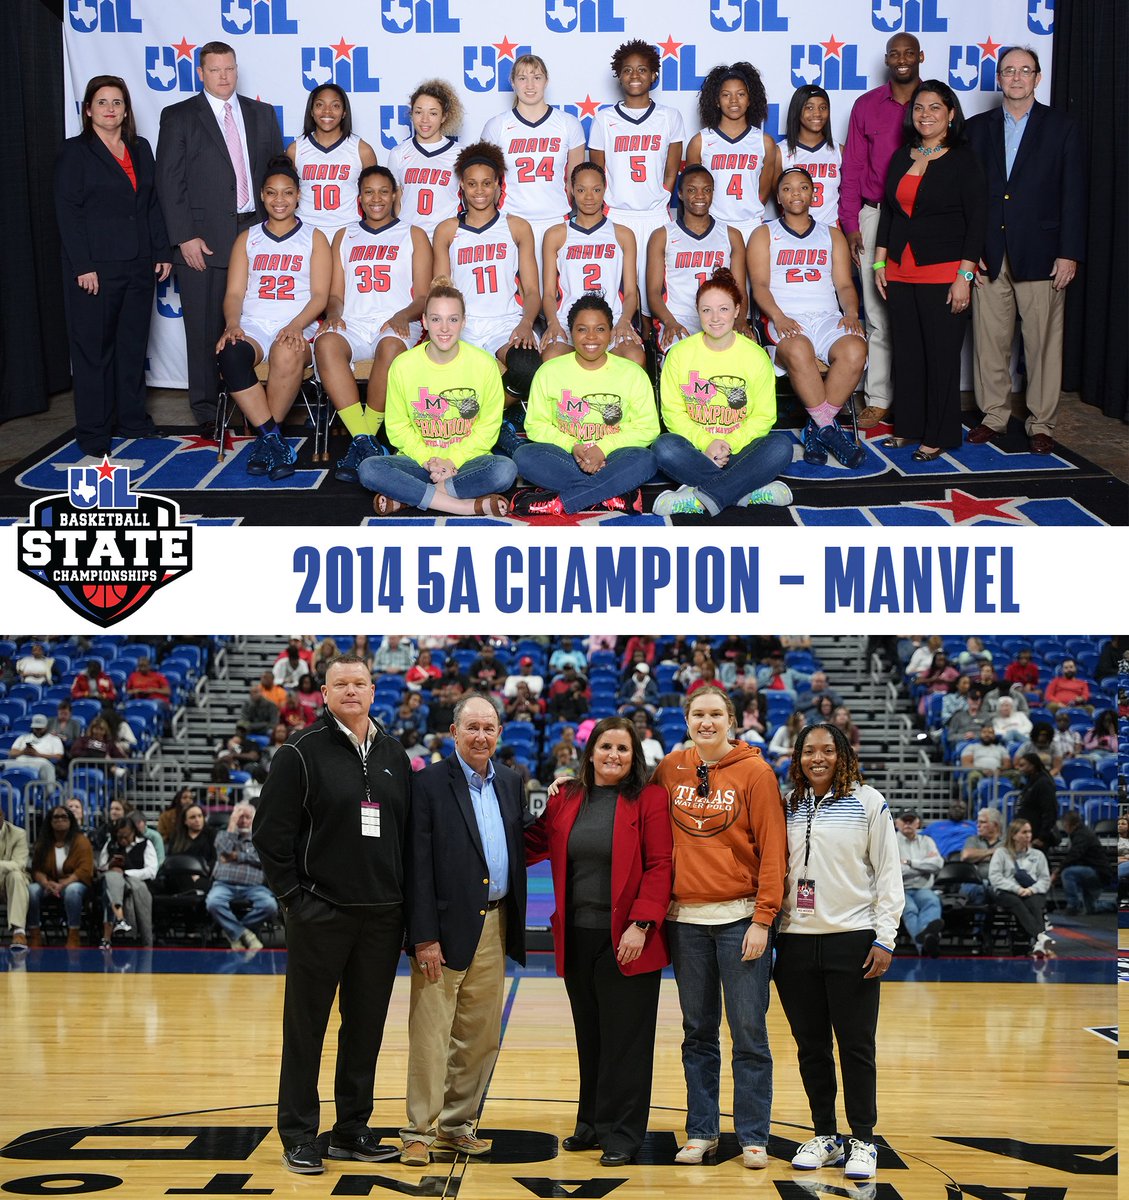 Thank you to Manvel, 2014 Conference 5A Honor Team, for joining us at #UILState! Celebrating the 10th anniversary of their UIL Basketball State Championship. #ThenAndNow